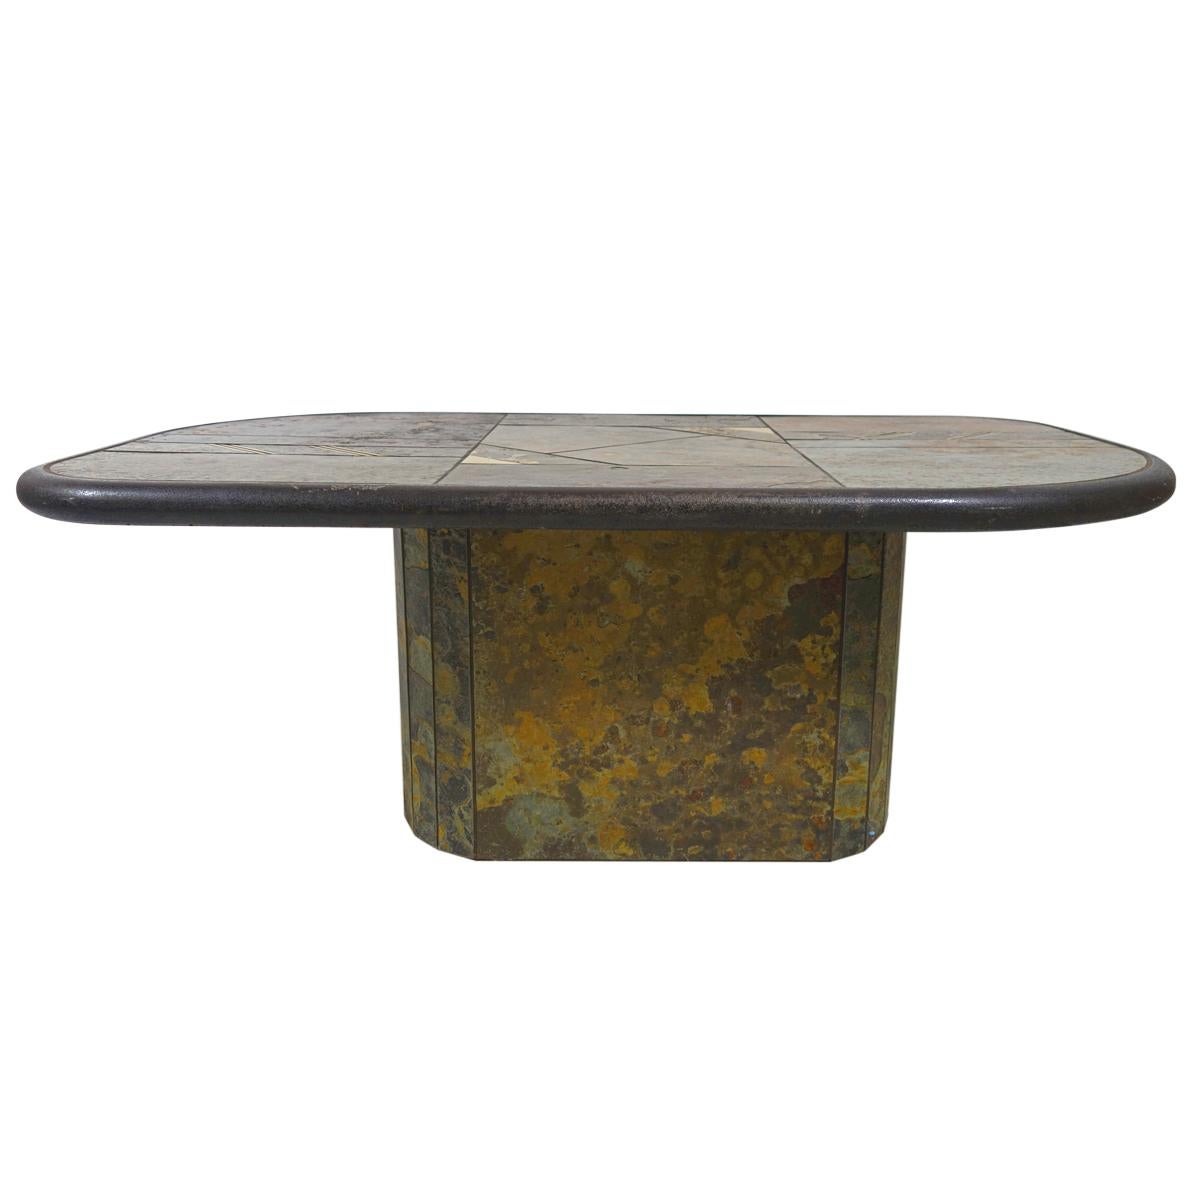 Dutch Brutalist Coffee Table Attributed to Paul Kingma Made of Stone, Slate and Brass For Sale